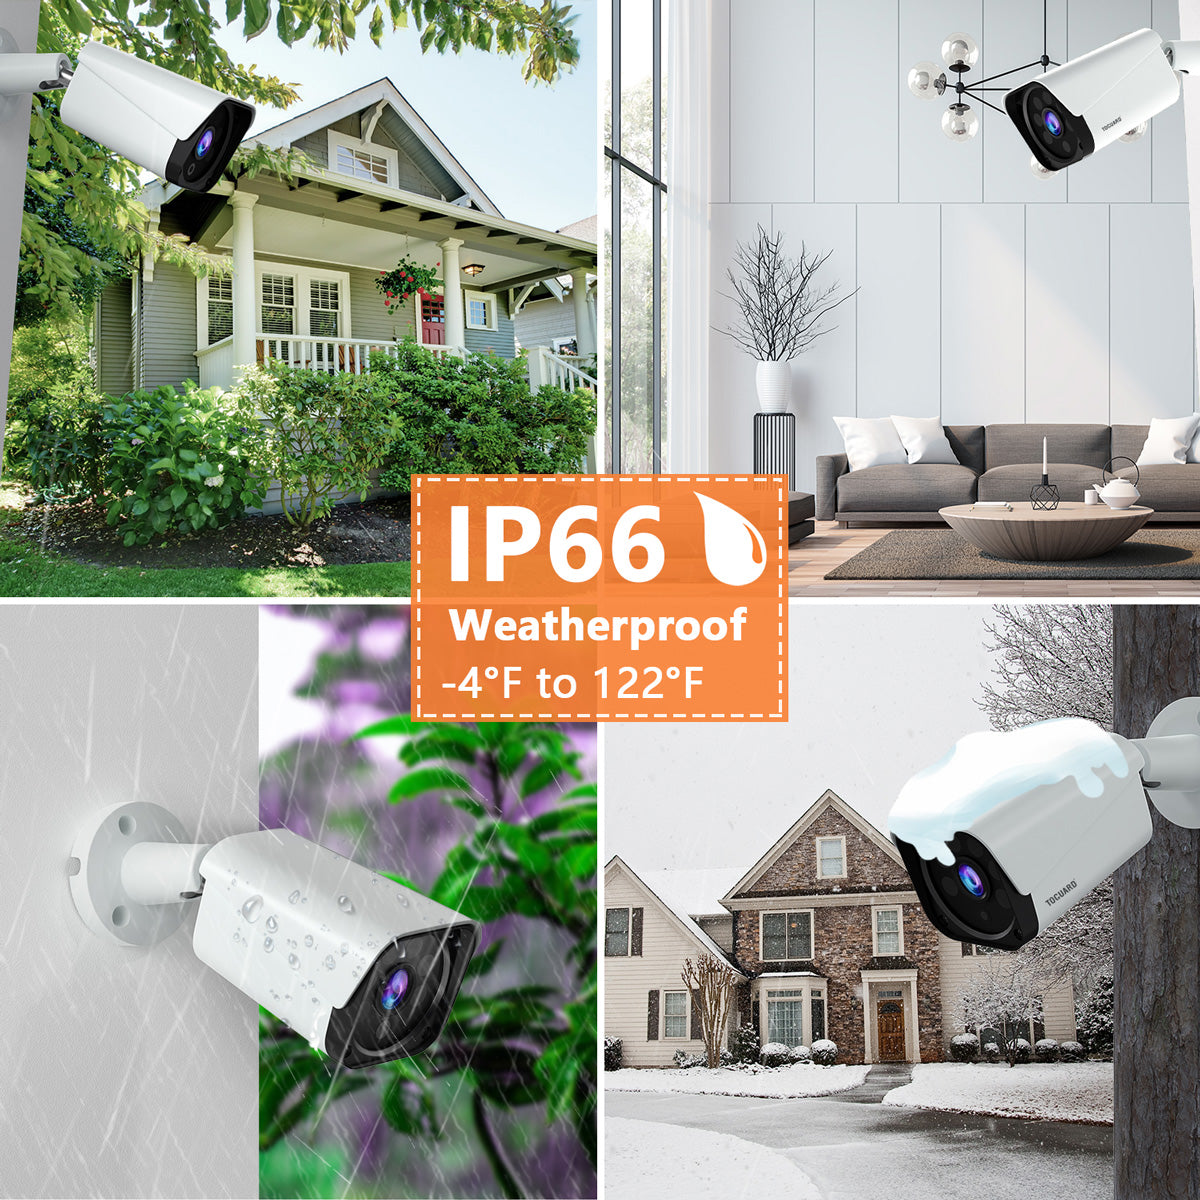 Campark W204 8CH 4Pcs 1080P DVR Cameras Security Camera With 3TB Hard Drive（Only available in the US））